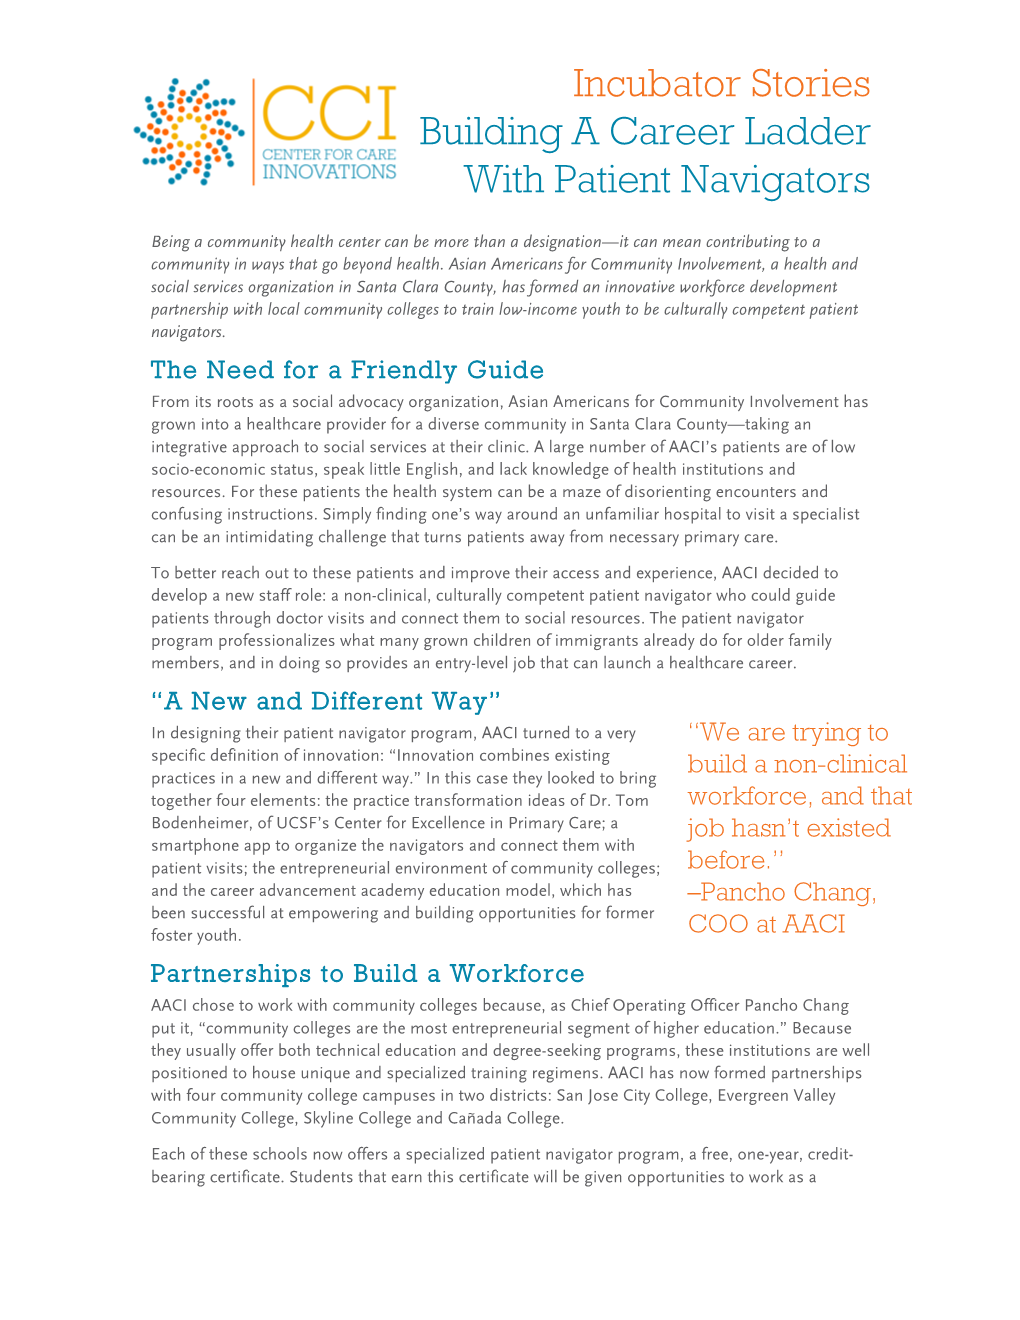 Incubator Stories Building a Career Ladder with Patient Navigators